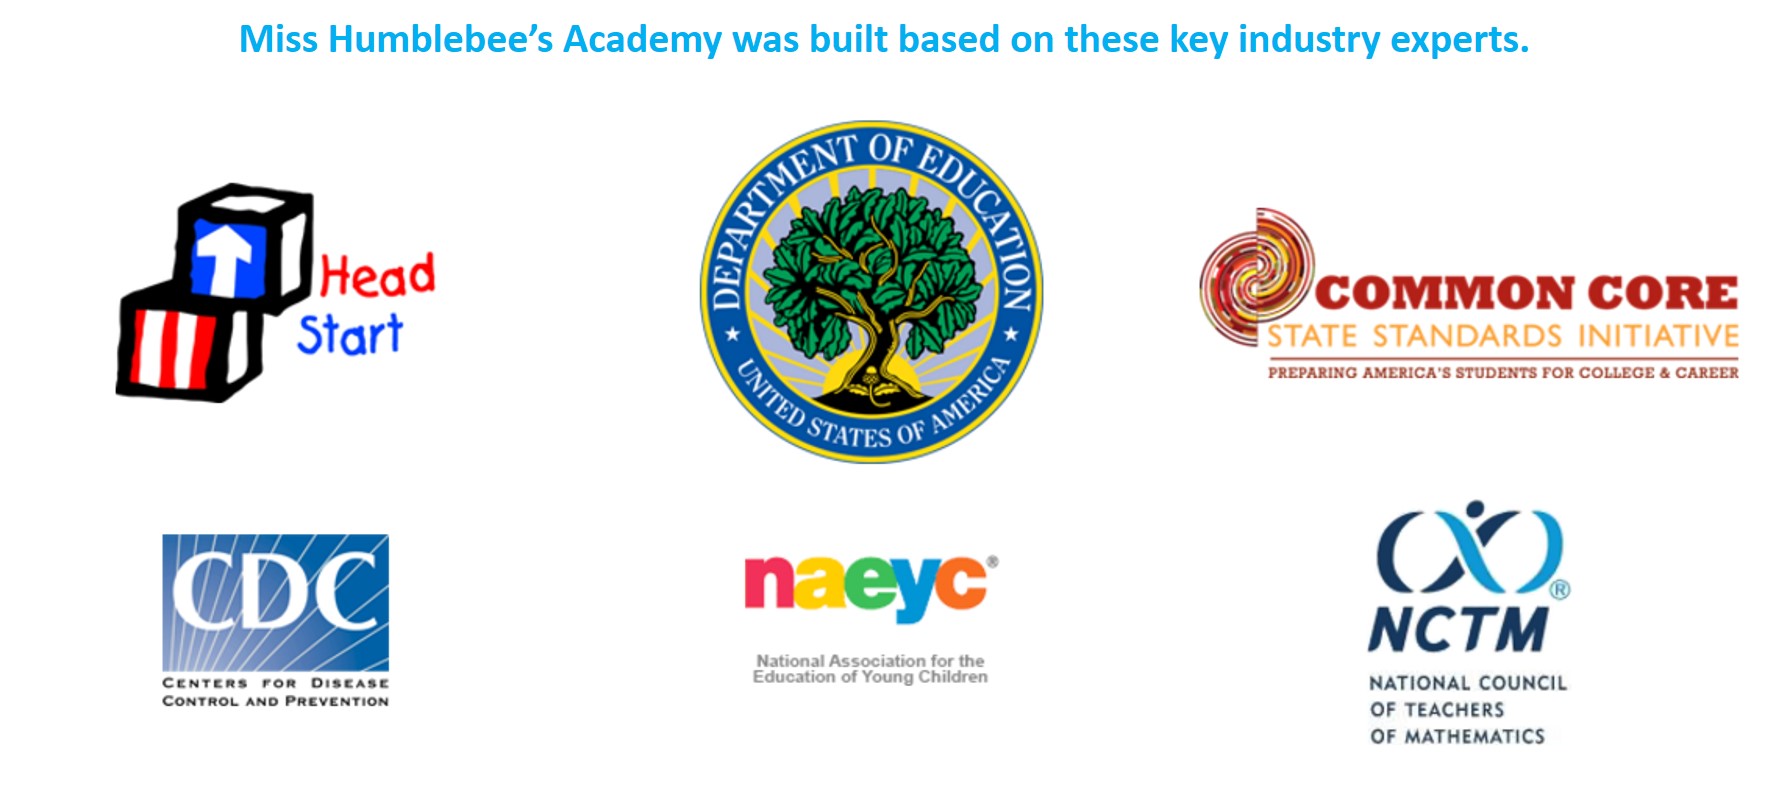 The program presents learning concepts based on guidelines from these organizations.